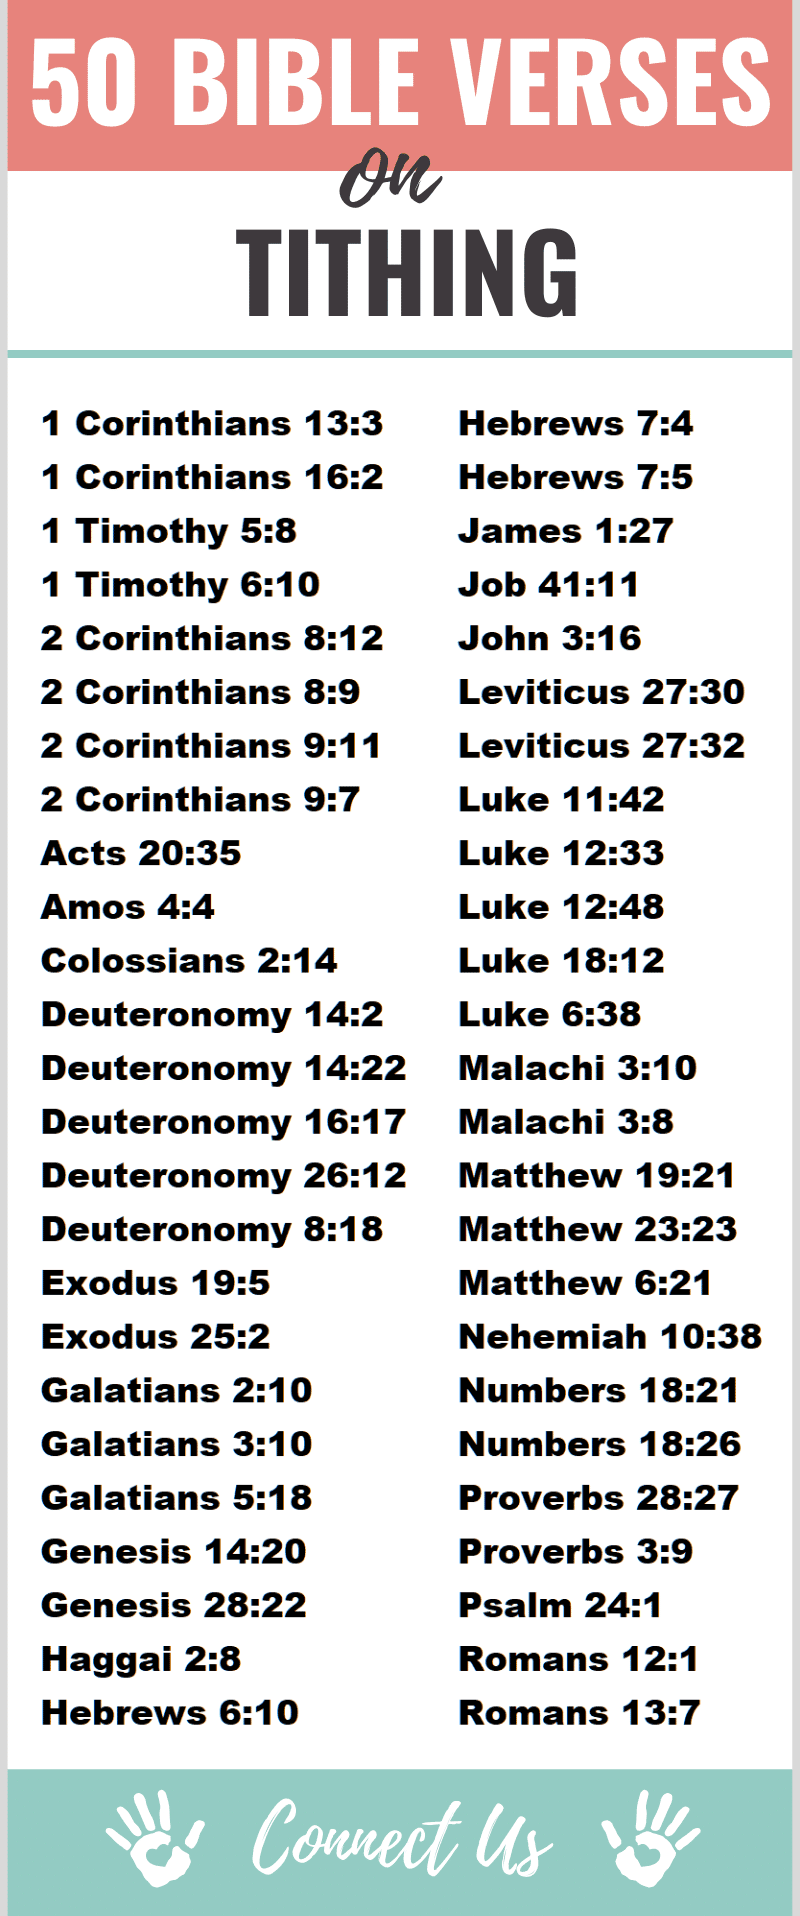 Bible Verses on Tithing